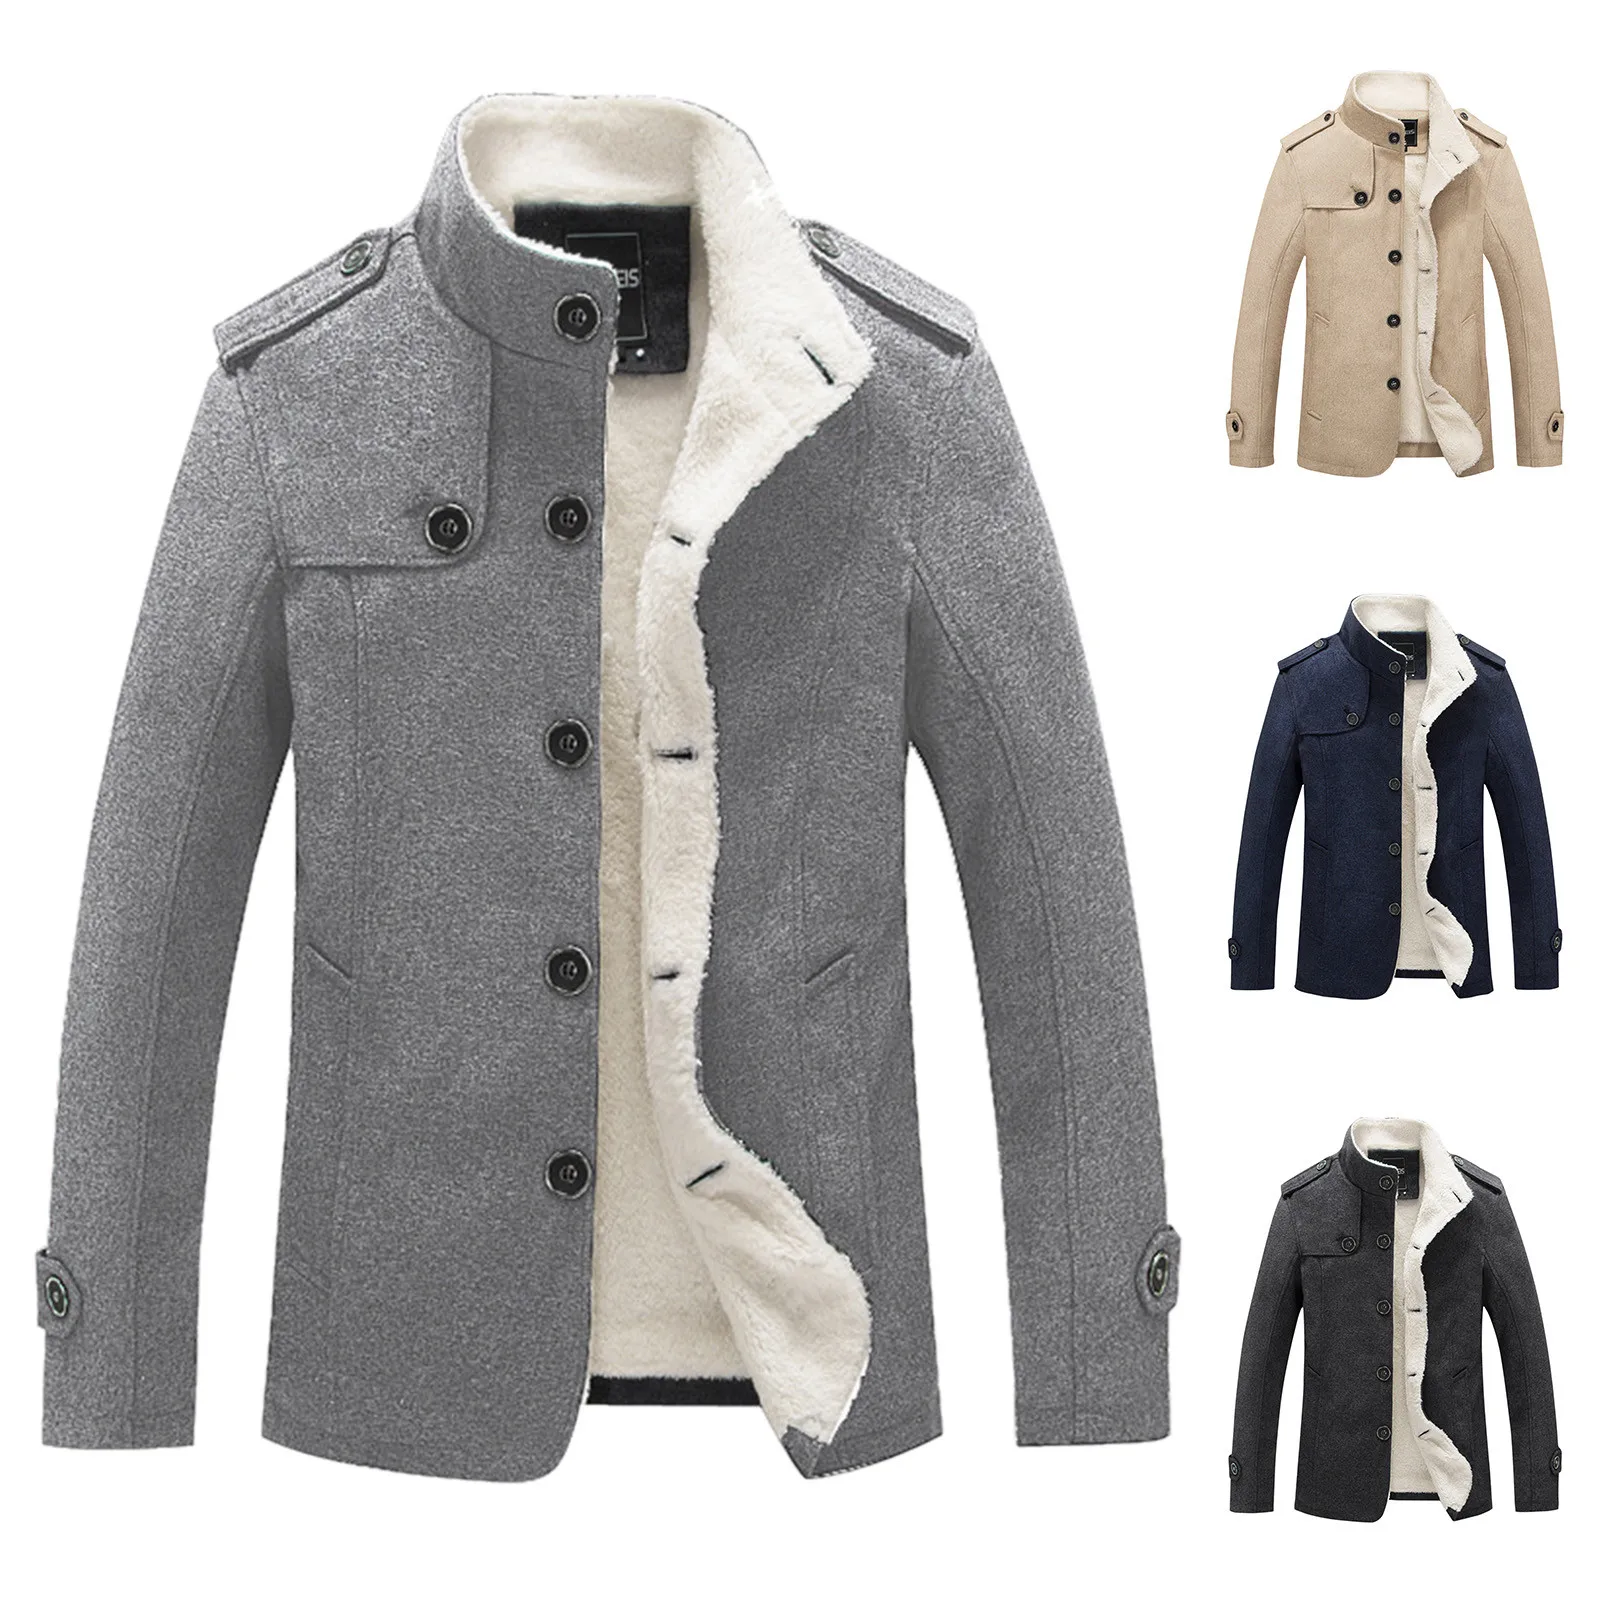 Mirecoo Mens Smart Fit Stand Collar Faux Wool Blend Fleece Borg Sherpa Lined Coat Buttoned Winter Short Jacket 